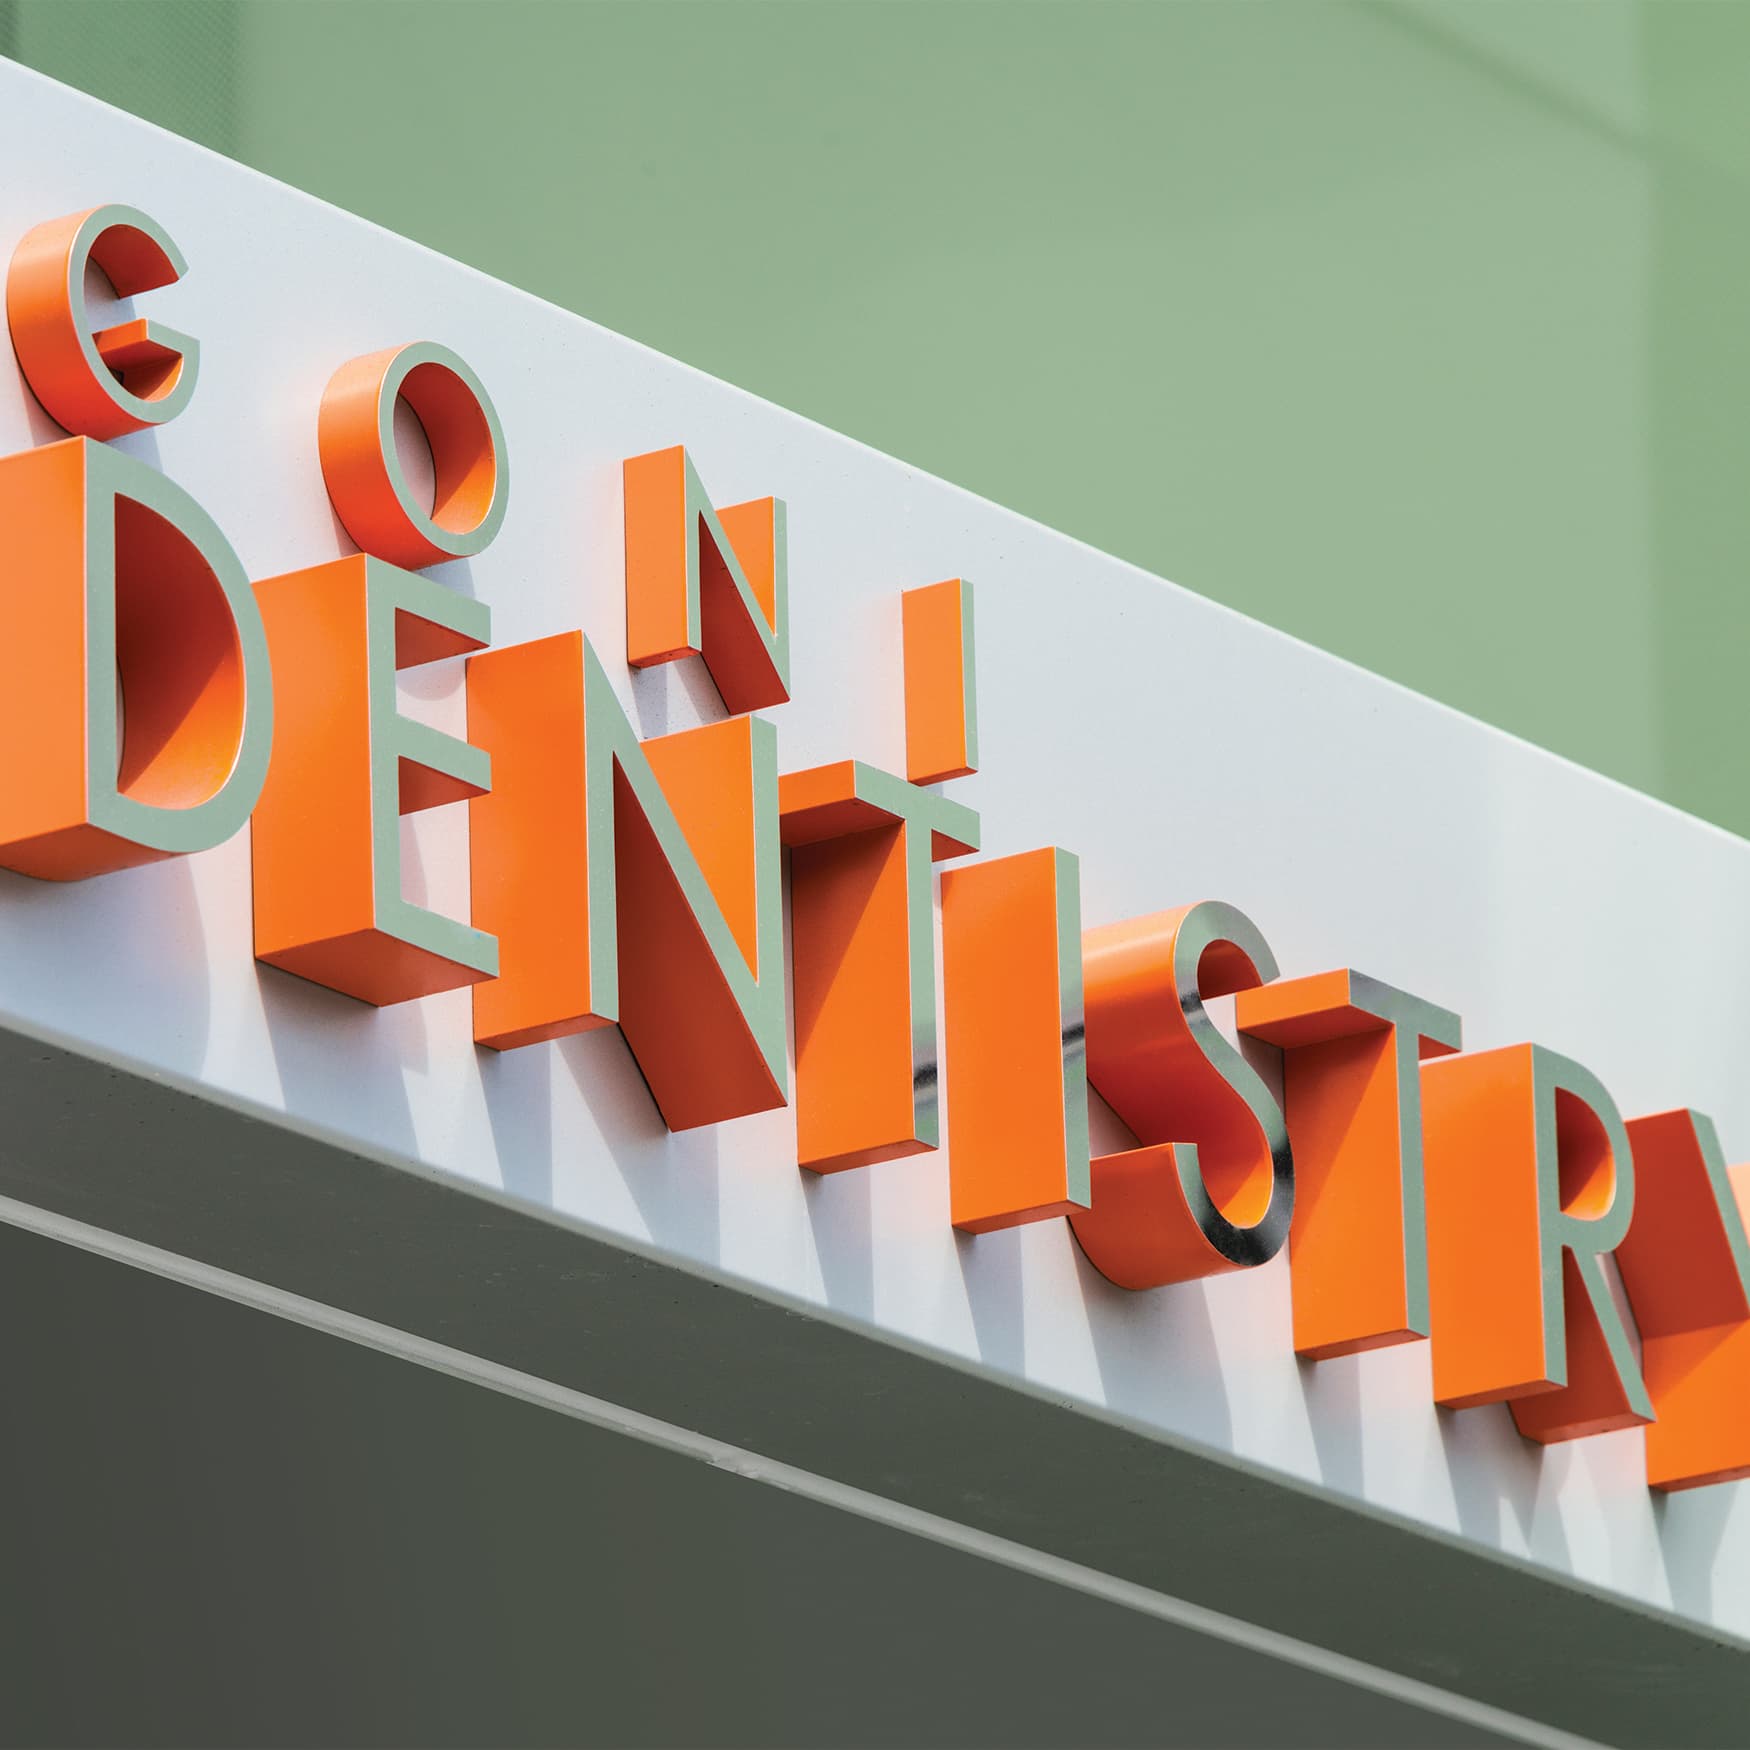 University of the Pacific, Education Design and Healthcare Design in San Francisco, California. Extruded letter signage with orange returns.